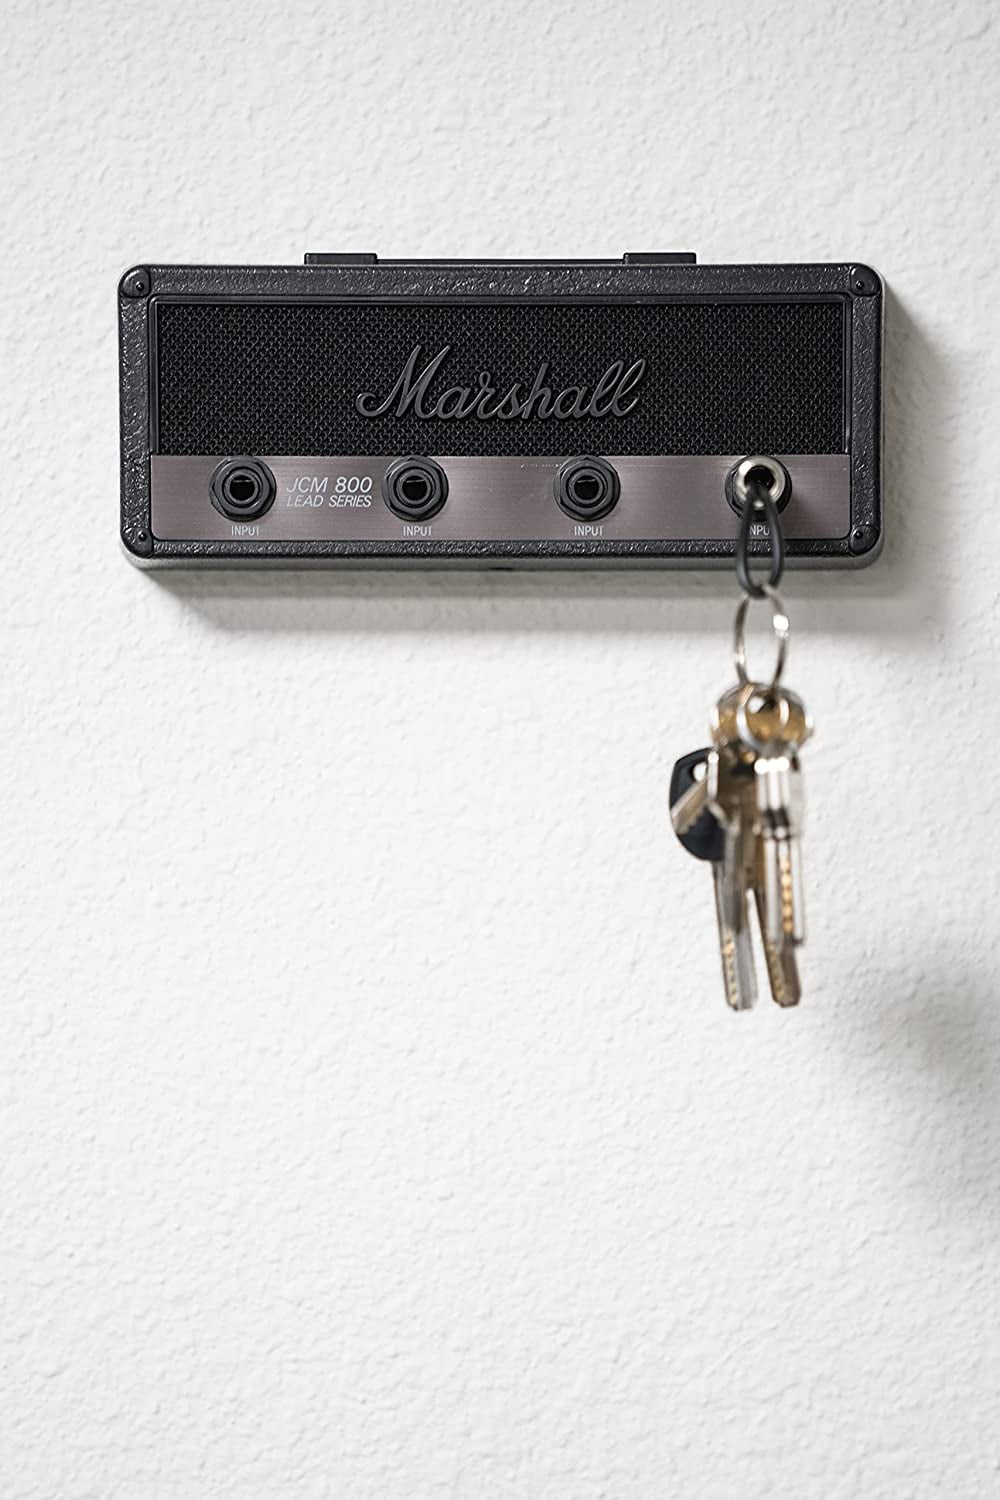 KeyKeeper Products™ - The Official Marshall Black Jack Rack